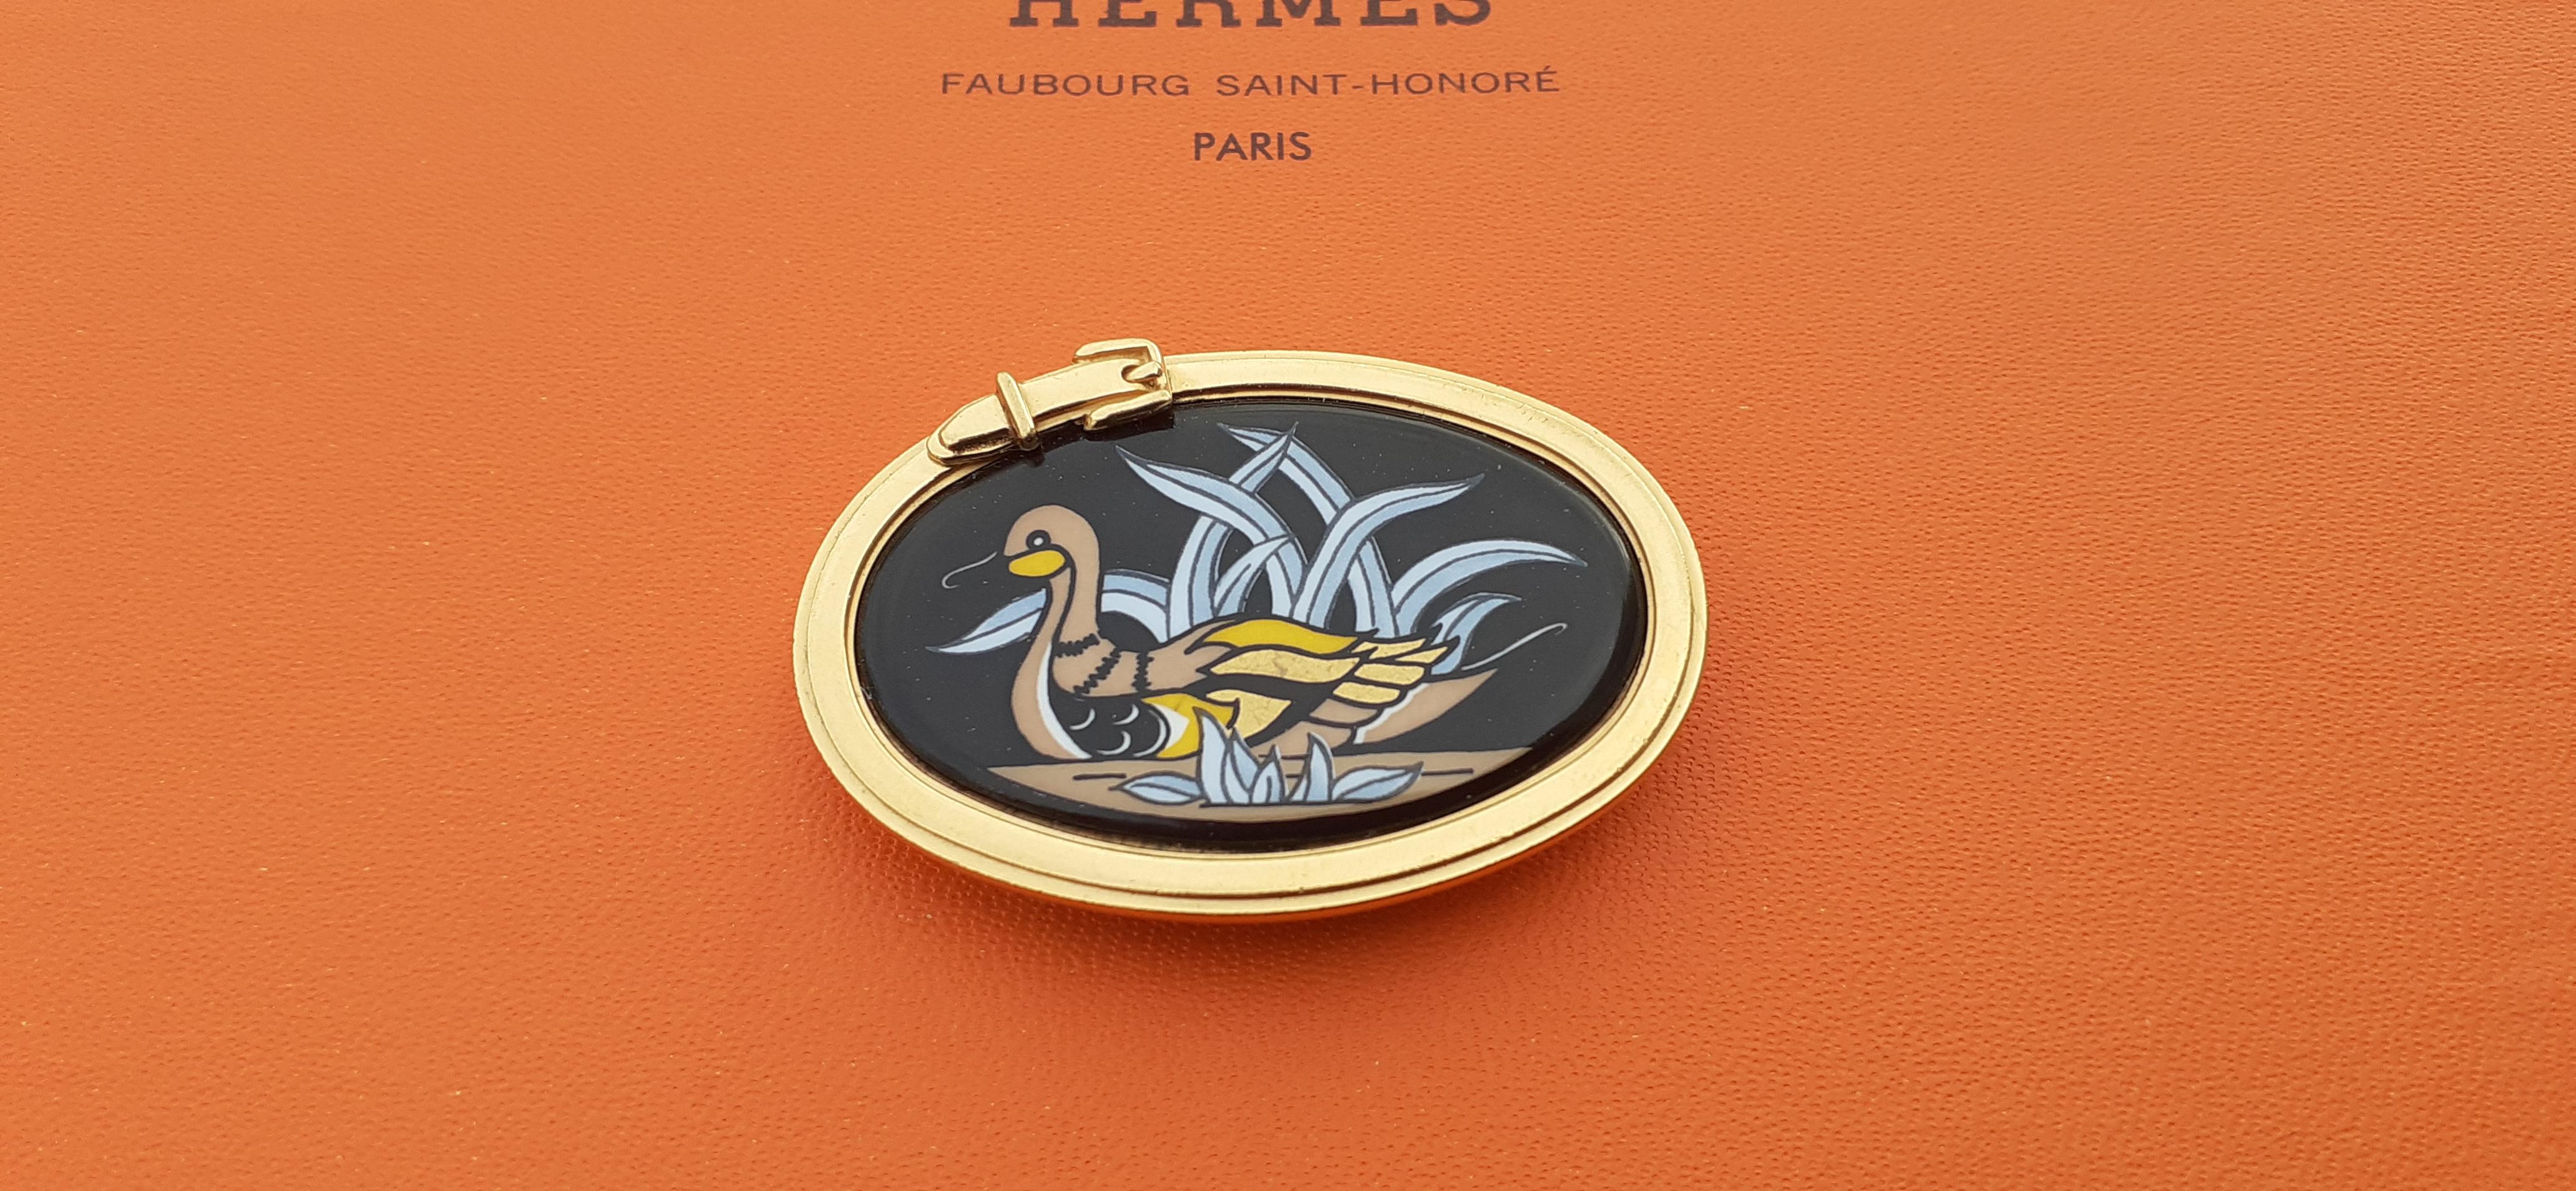 Cute and Lovely Authentic Hermès Brooch

Print: Duck

Made in France

Made of enamel and golden hardware

The metal surround ends in a pretty belt buckle

Colorways: Gold / Black / Beige / Yellow / Grey

Lovely golden reflections on the